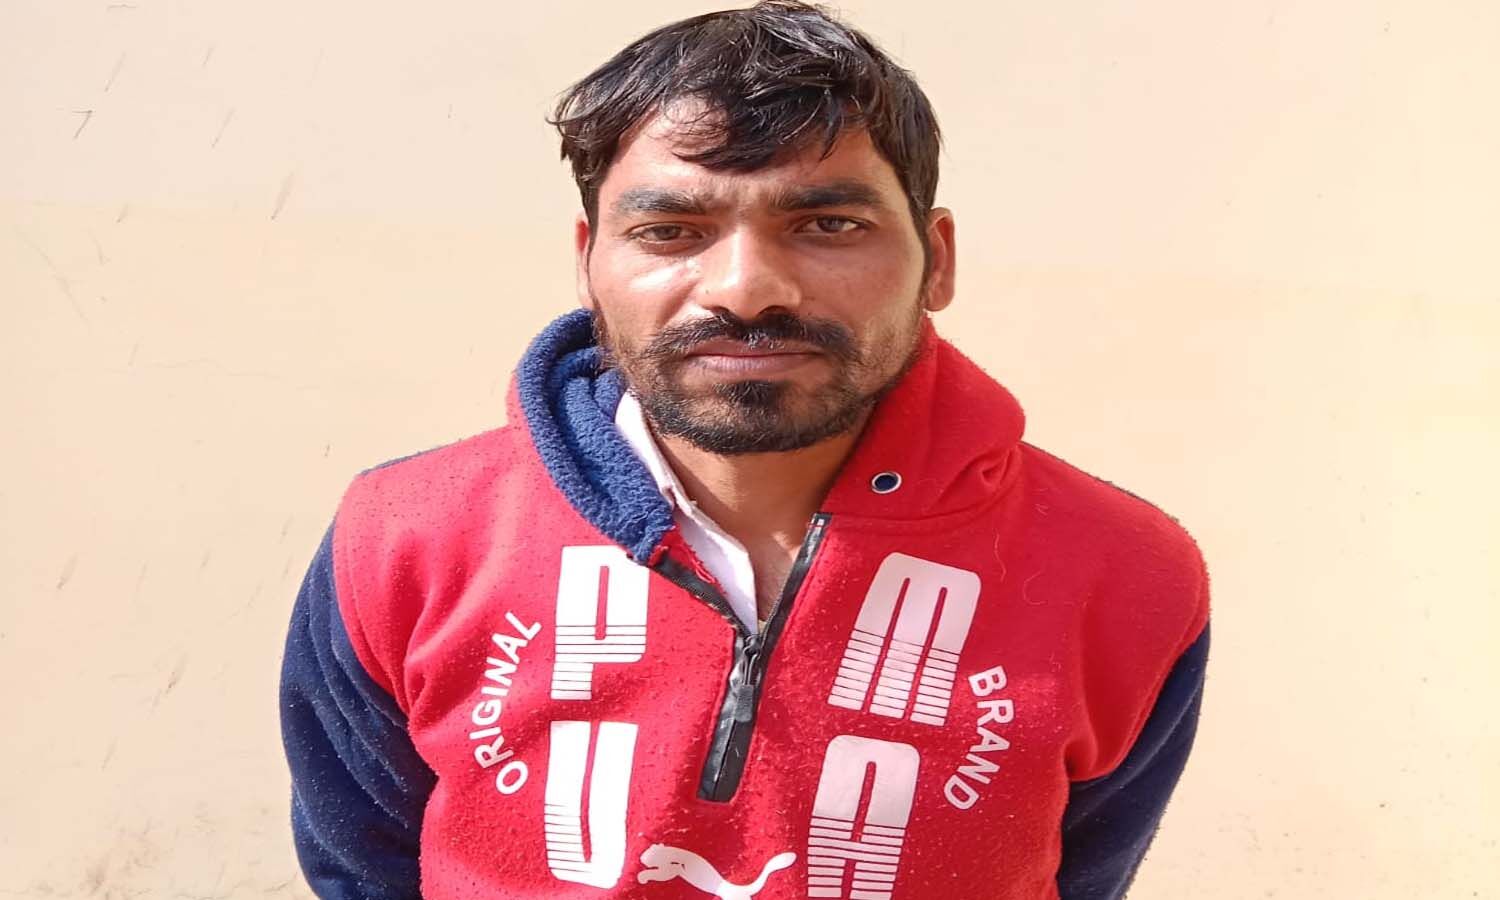 The Killer Of Mother And Sisters Arrested In Hamirpur Confessed To The